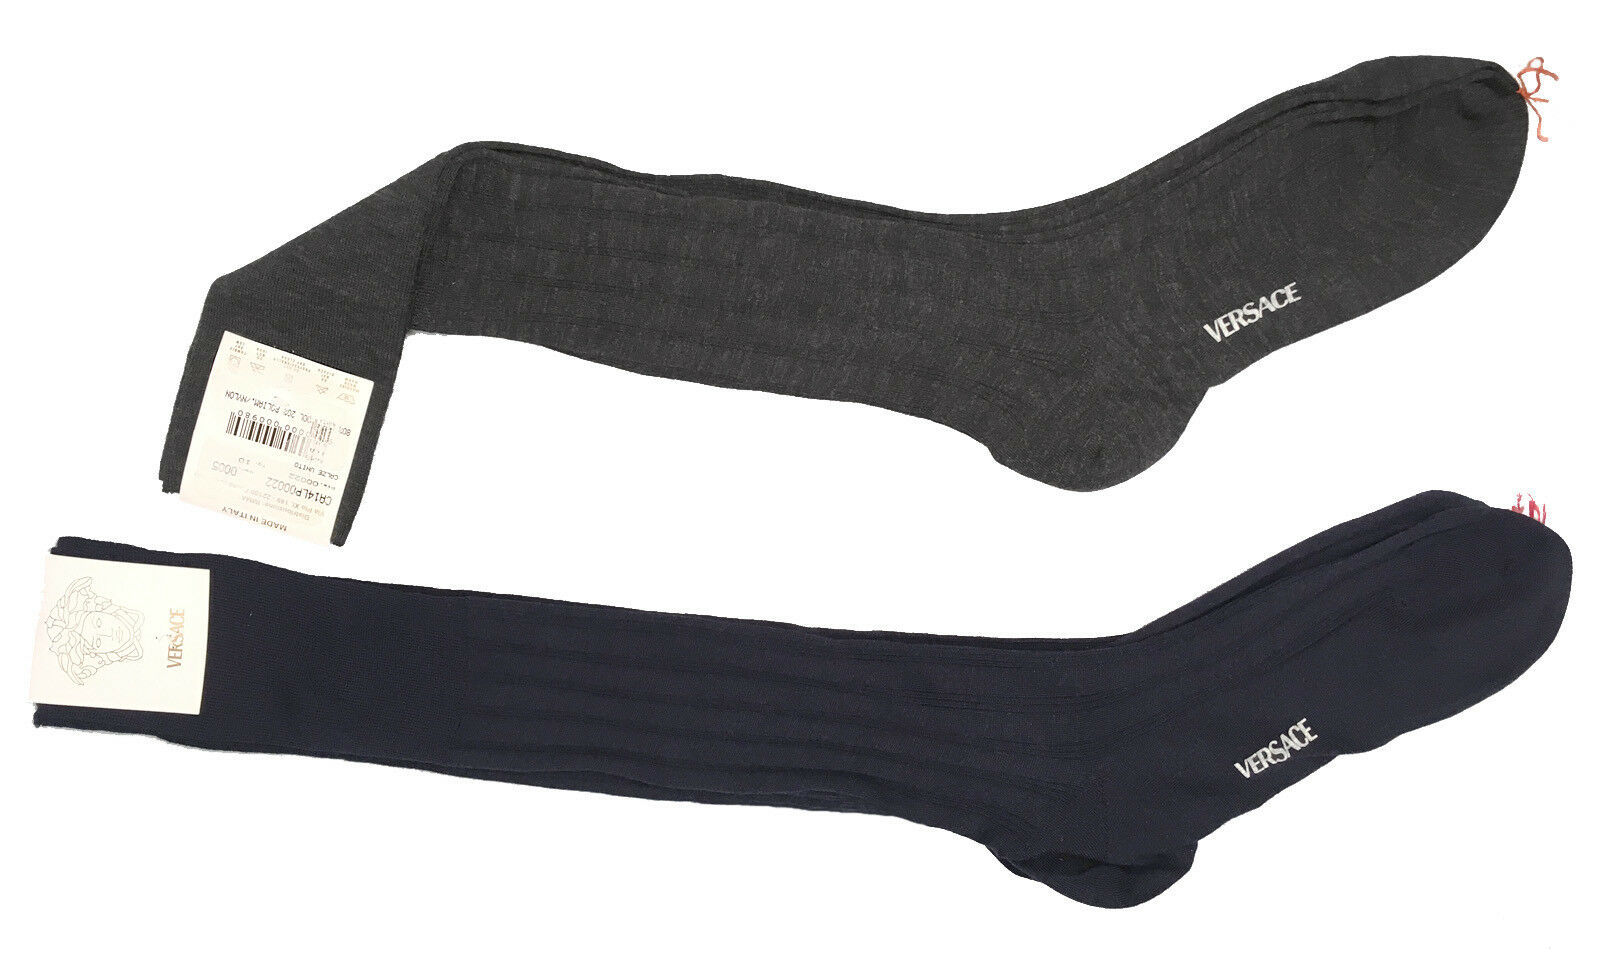 NEW Gianni Versace Couture Dress Socks!  *Navy or Gray*  *Wool Blend*  *Italy* - $39.99